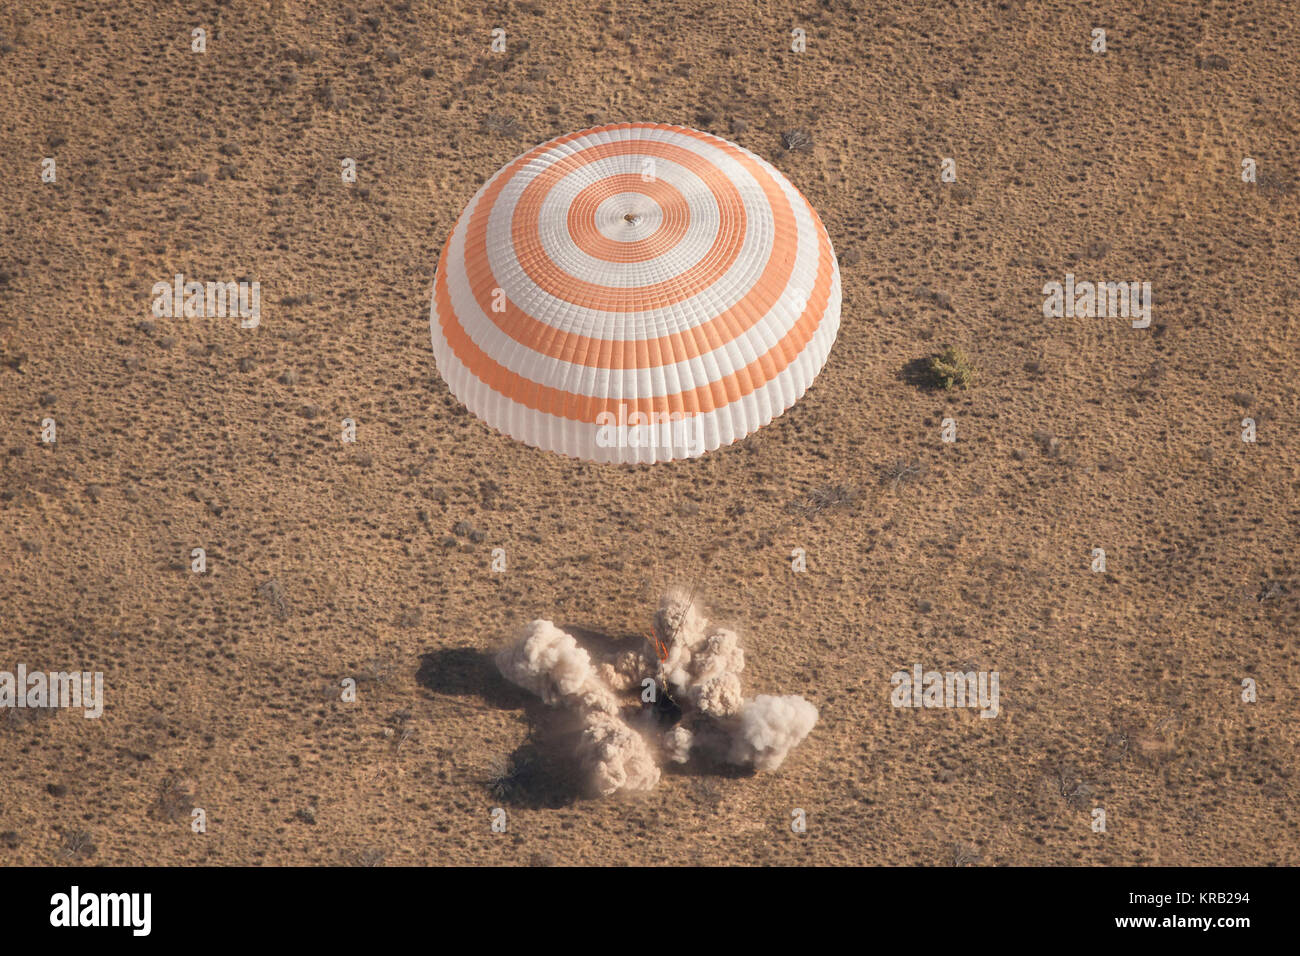 The Soyuz TMA-21 spacecraft is seen as it lands with Expedition 28 Commander Andrey Borisenko, and Flight Engineers Ron Garan, and Alexander Samokutyaev in a remote area outside of the town of Zhezkazgan, Kazakhstan, on Friday, Sept. 16, 2011. NASA Astronaut Garan, Russian Cosmonauts Borisenko and Samokutyaev are returning from more than five months onboard the International Space Station where they served as members of the Expedition 27 and 28 crews. Photo Credit: (NASA/Bill Ingalls) Soyuz TMA-21 landing Stock Photo